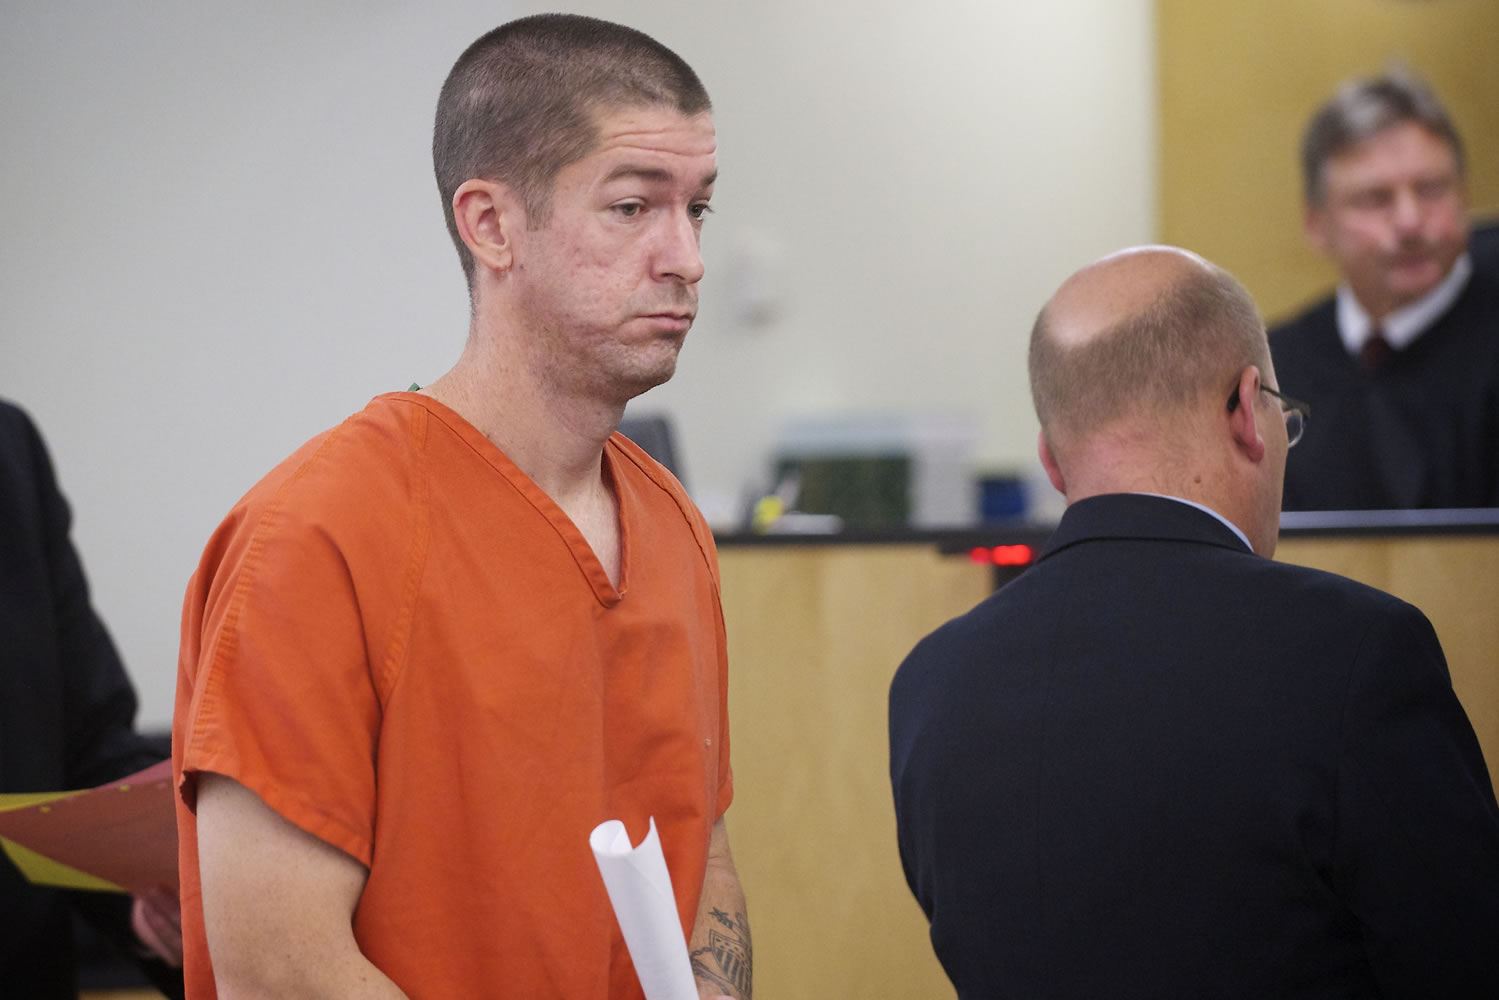 Mitchell O'Brien, charged with first-degree murder in the 2011 death of Vancouver resident Deneace McSpadden, makes a first appearance in Clark County Superior Court on Wednesday.